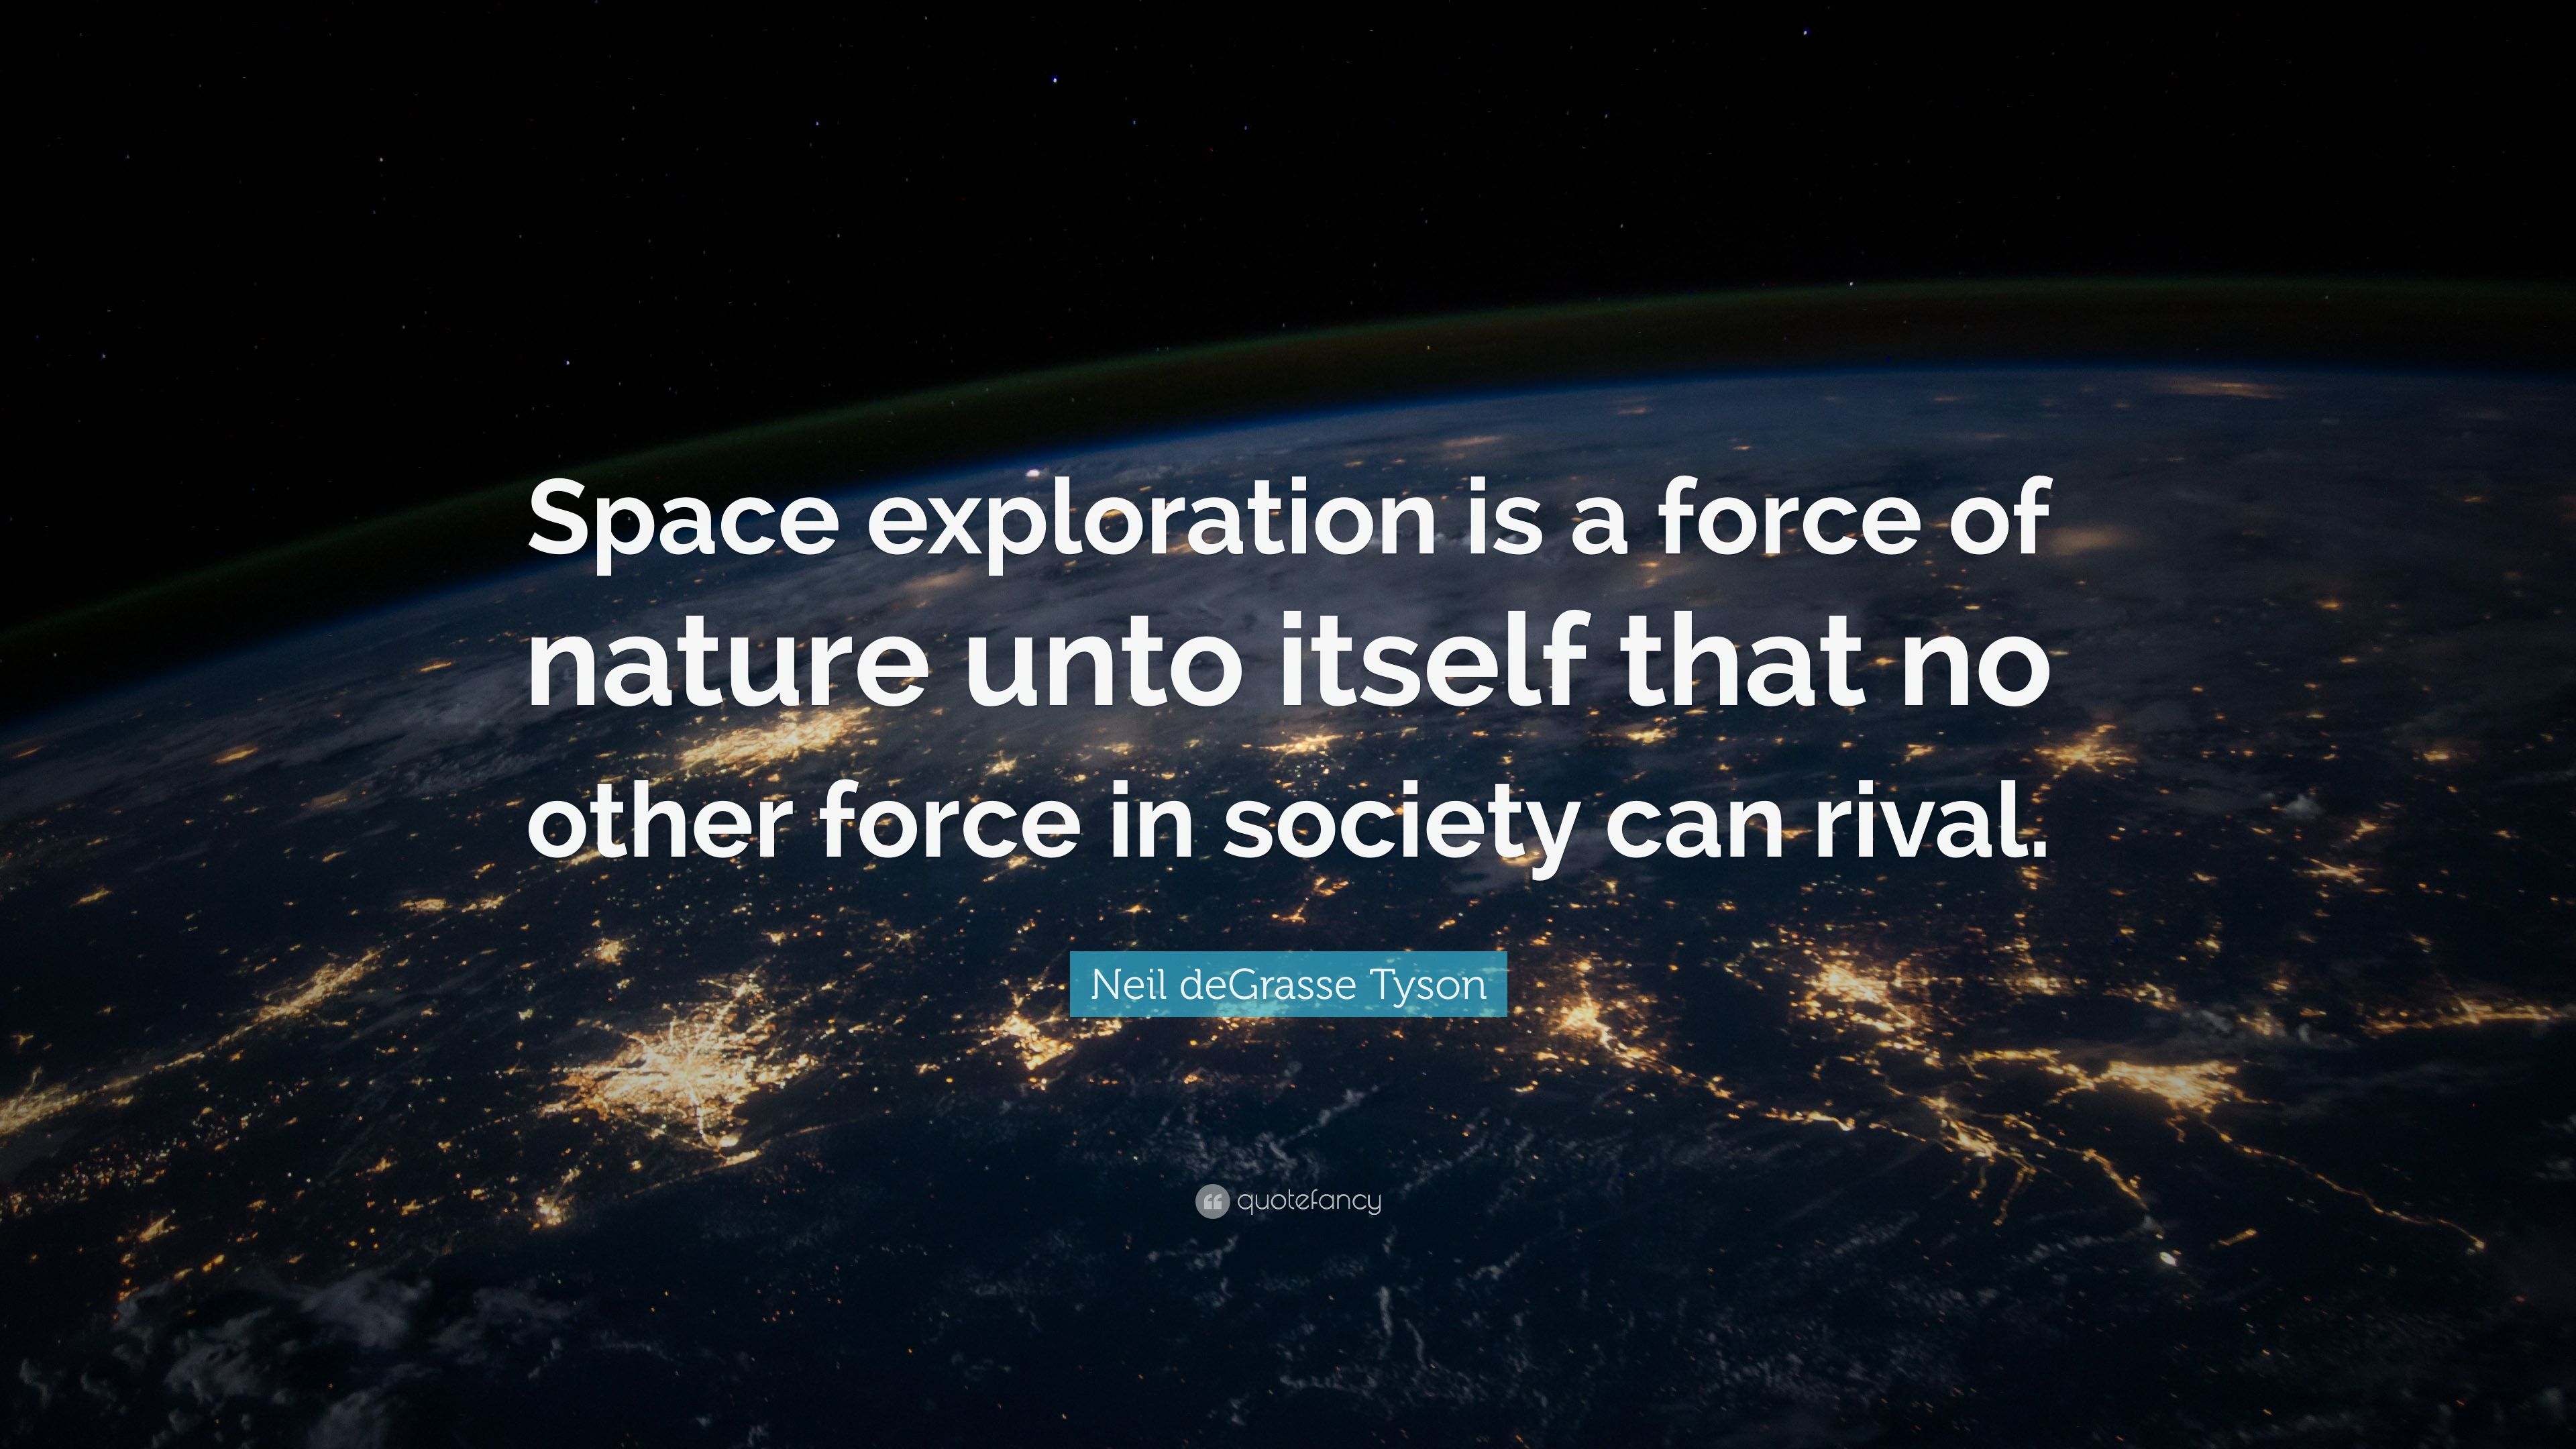 Neil deGrasse Tyson Quote: “Space exploration is a force of nature